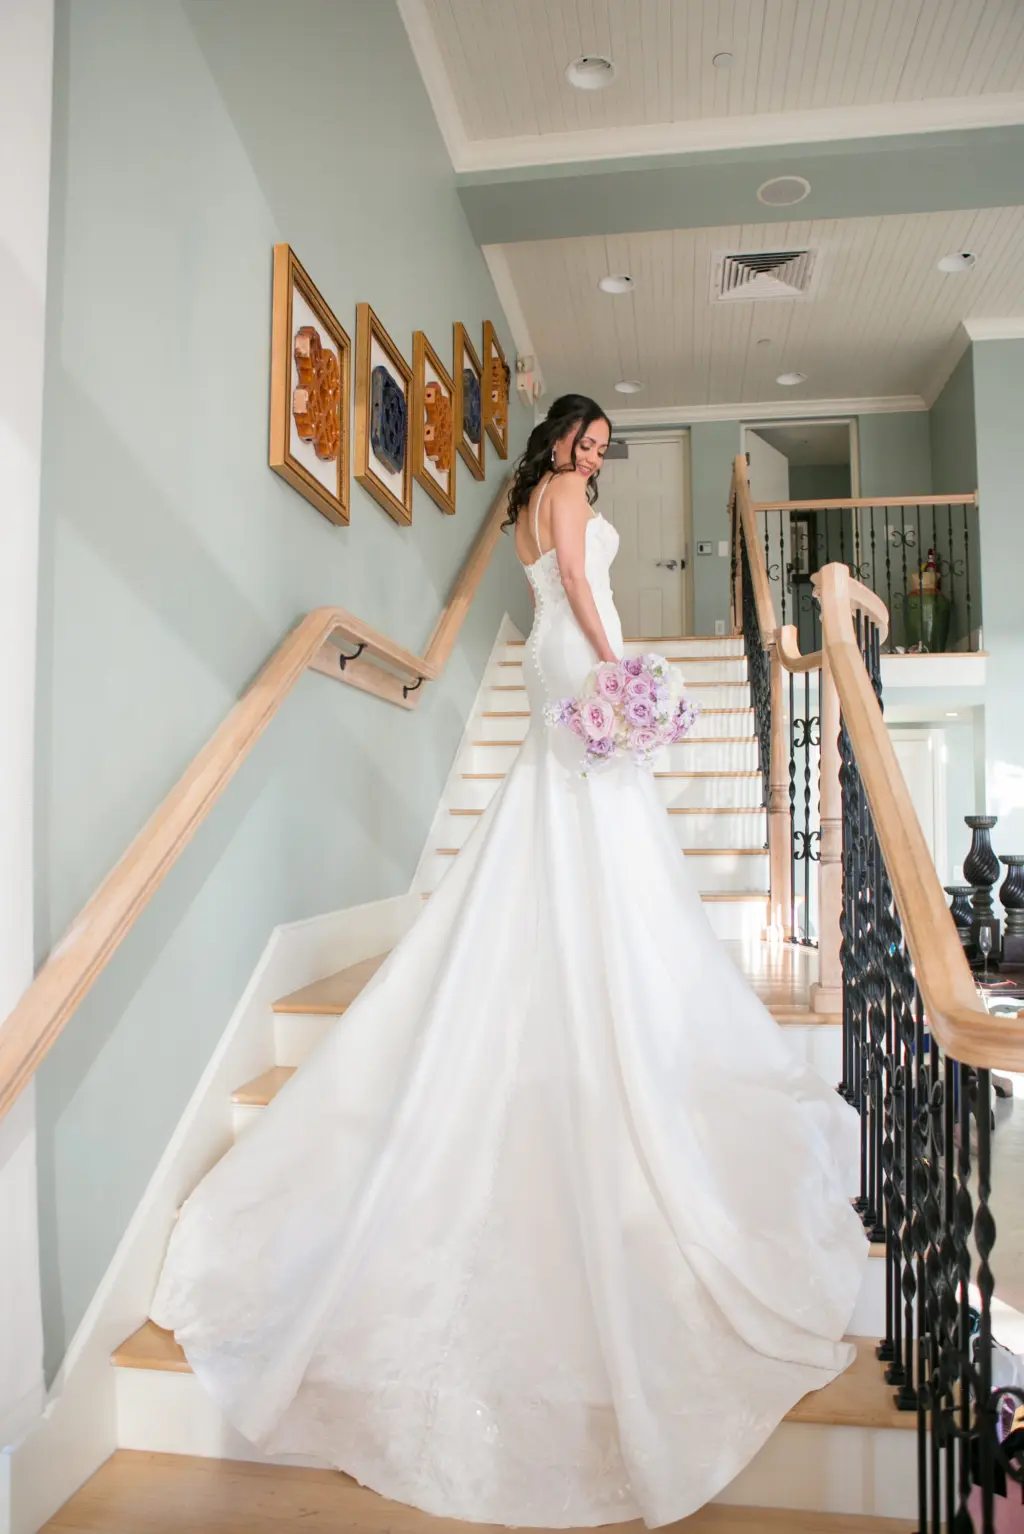 White Removable Spaghetti Strap Lace and Satin Mermaid Wedding Dress with Cathedral Train Inspiration | Tampa Bay Boutique Truly Forever Bridal | Clearwater Photographer Carrie Wildes Photography | Bridal Portrait on Staircase